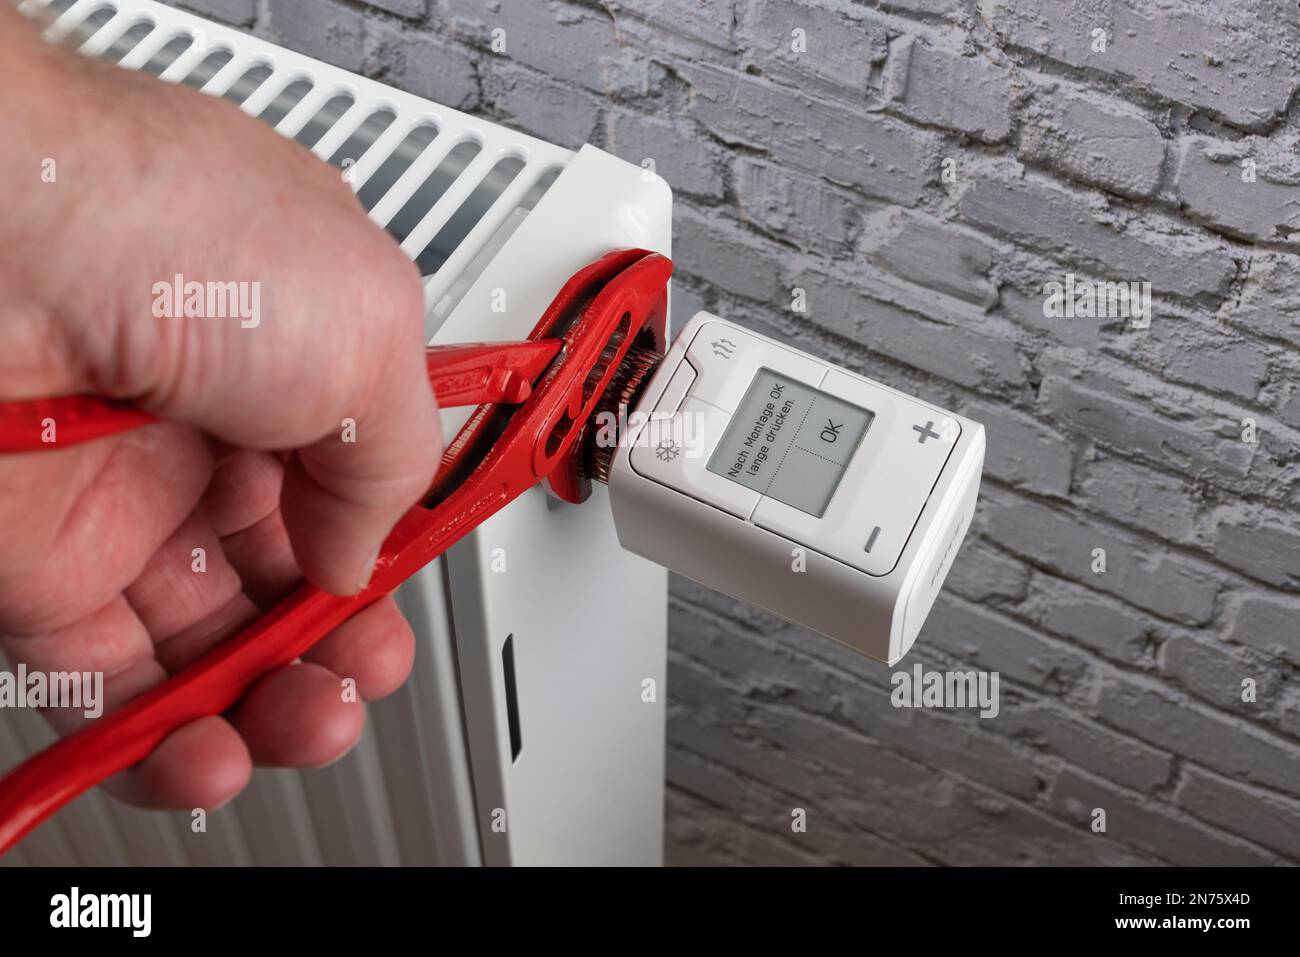 Man's hand with water pump pliers mounted WLAN radiator thermostat